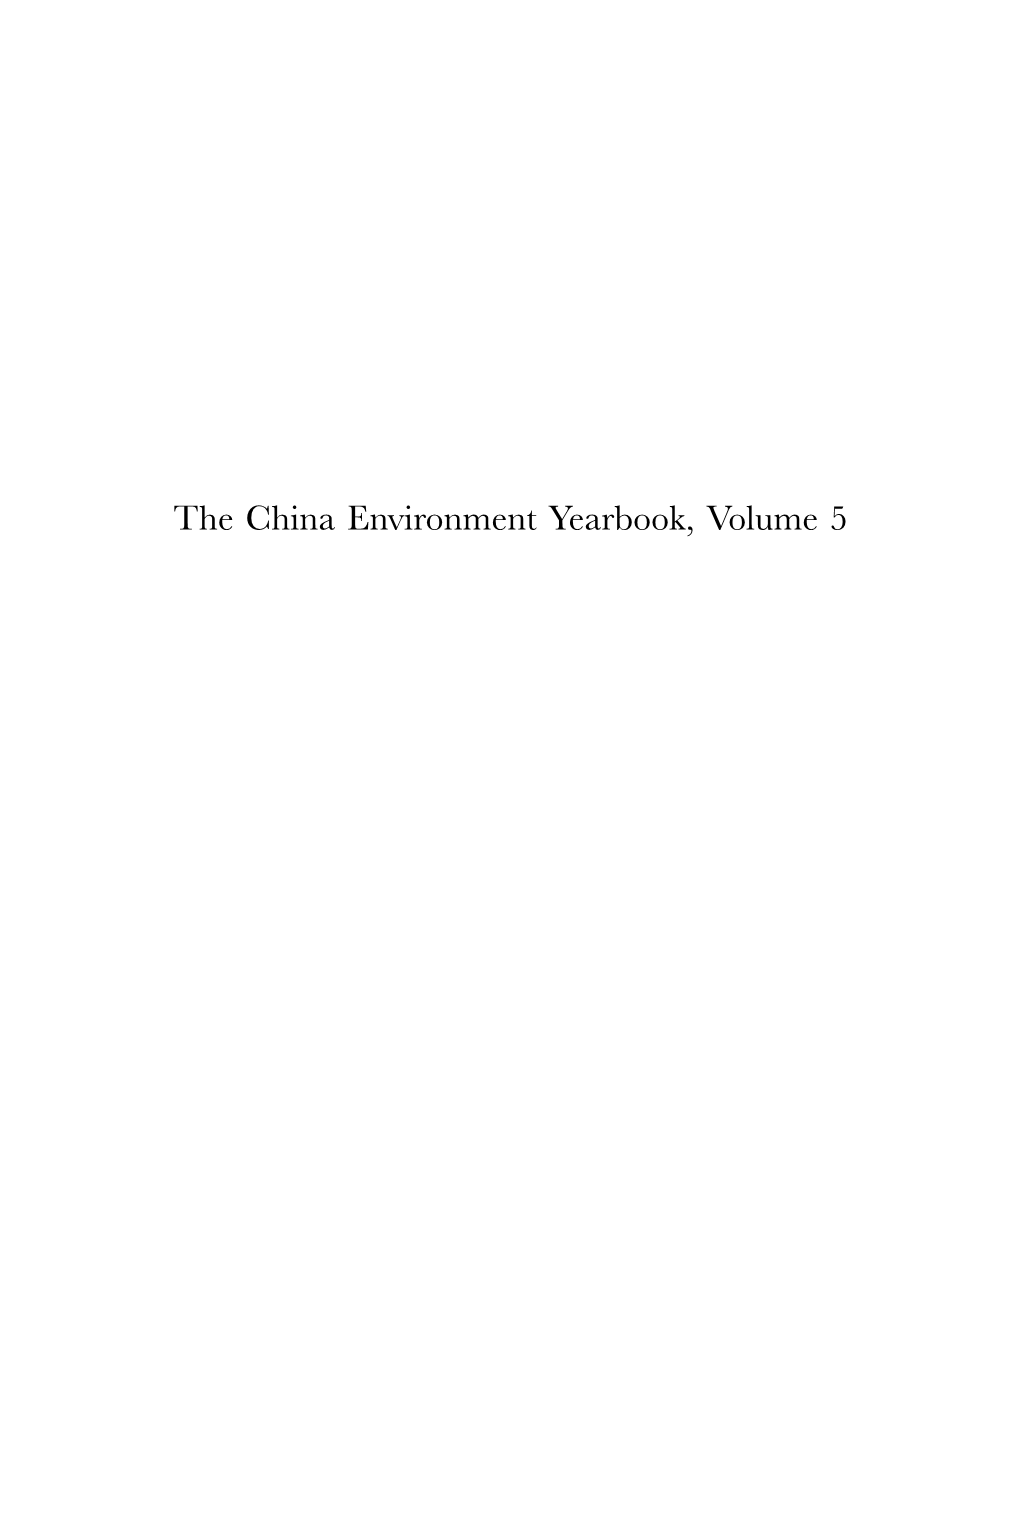 The China Environment Yearbook, Volume 5 the Chinese Academy of Social Sciences Yearbooks: Environment